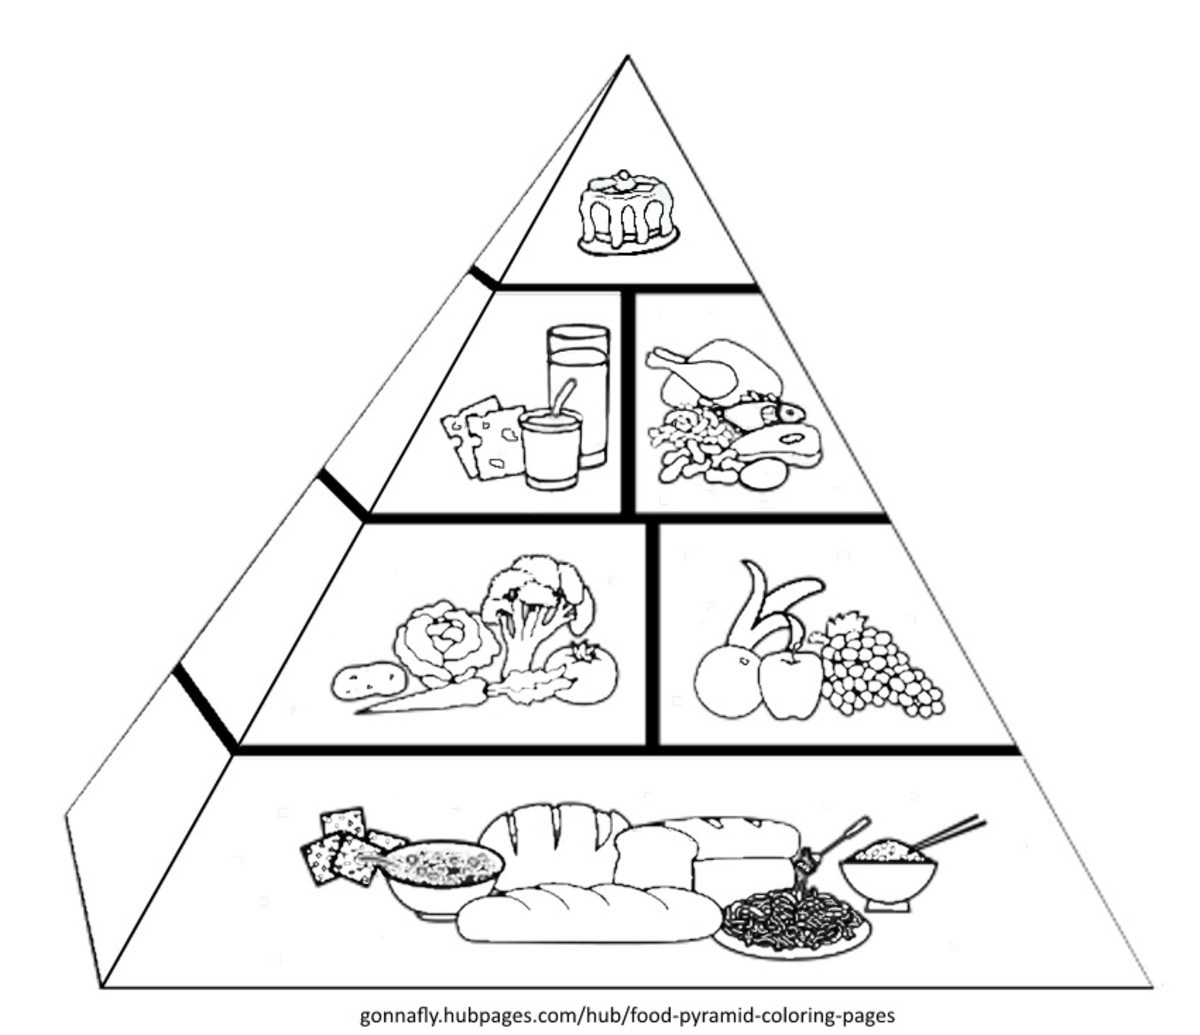 Download Food Pyramid Coloring Pages | HubPages